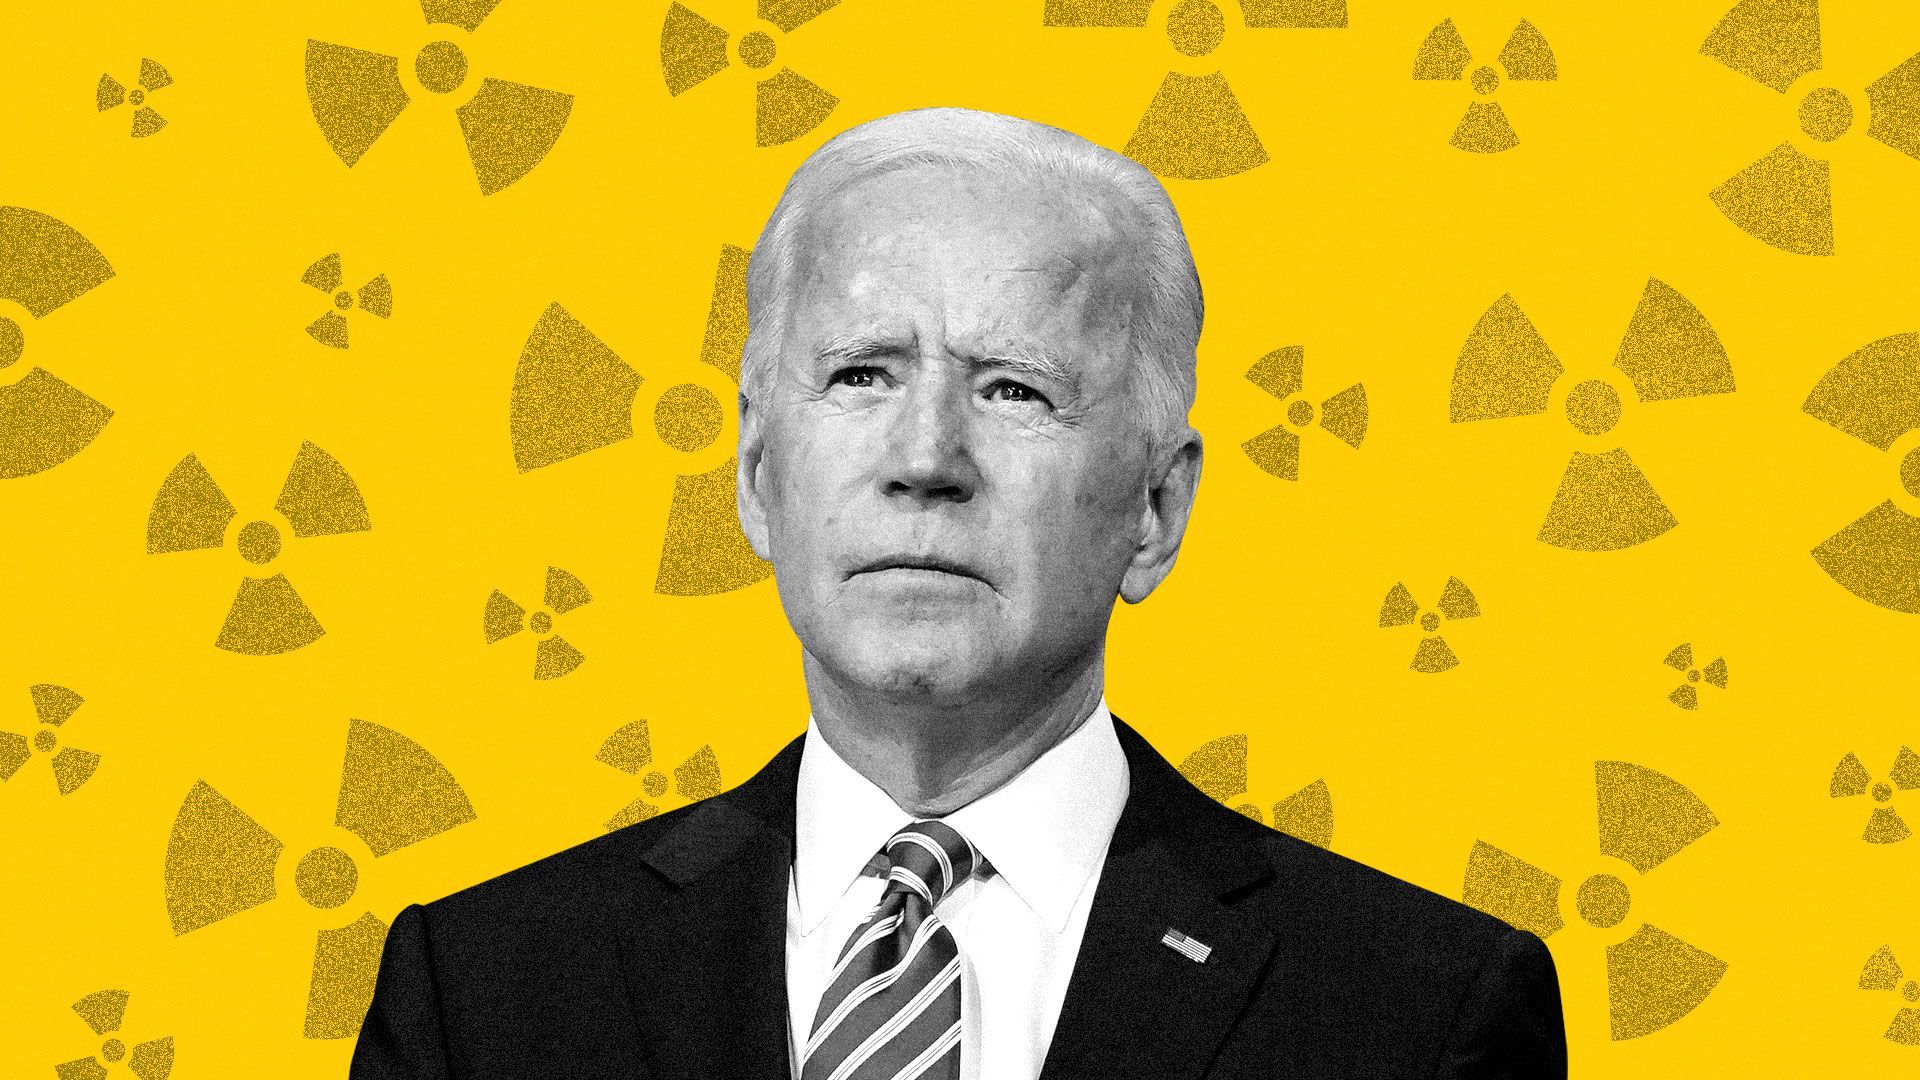 Illustration of serious looking Joseph Biden on a nuclear icon pattern